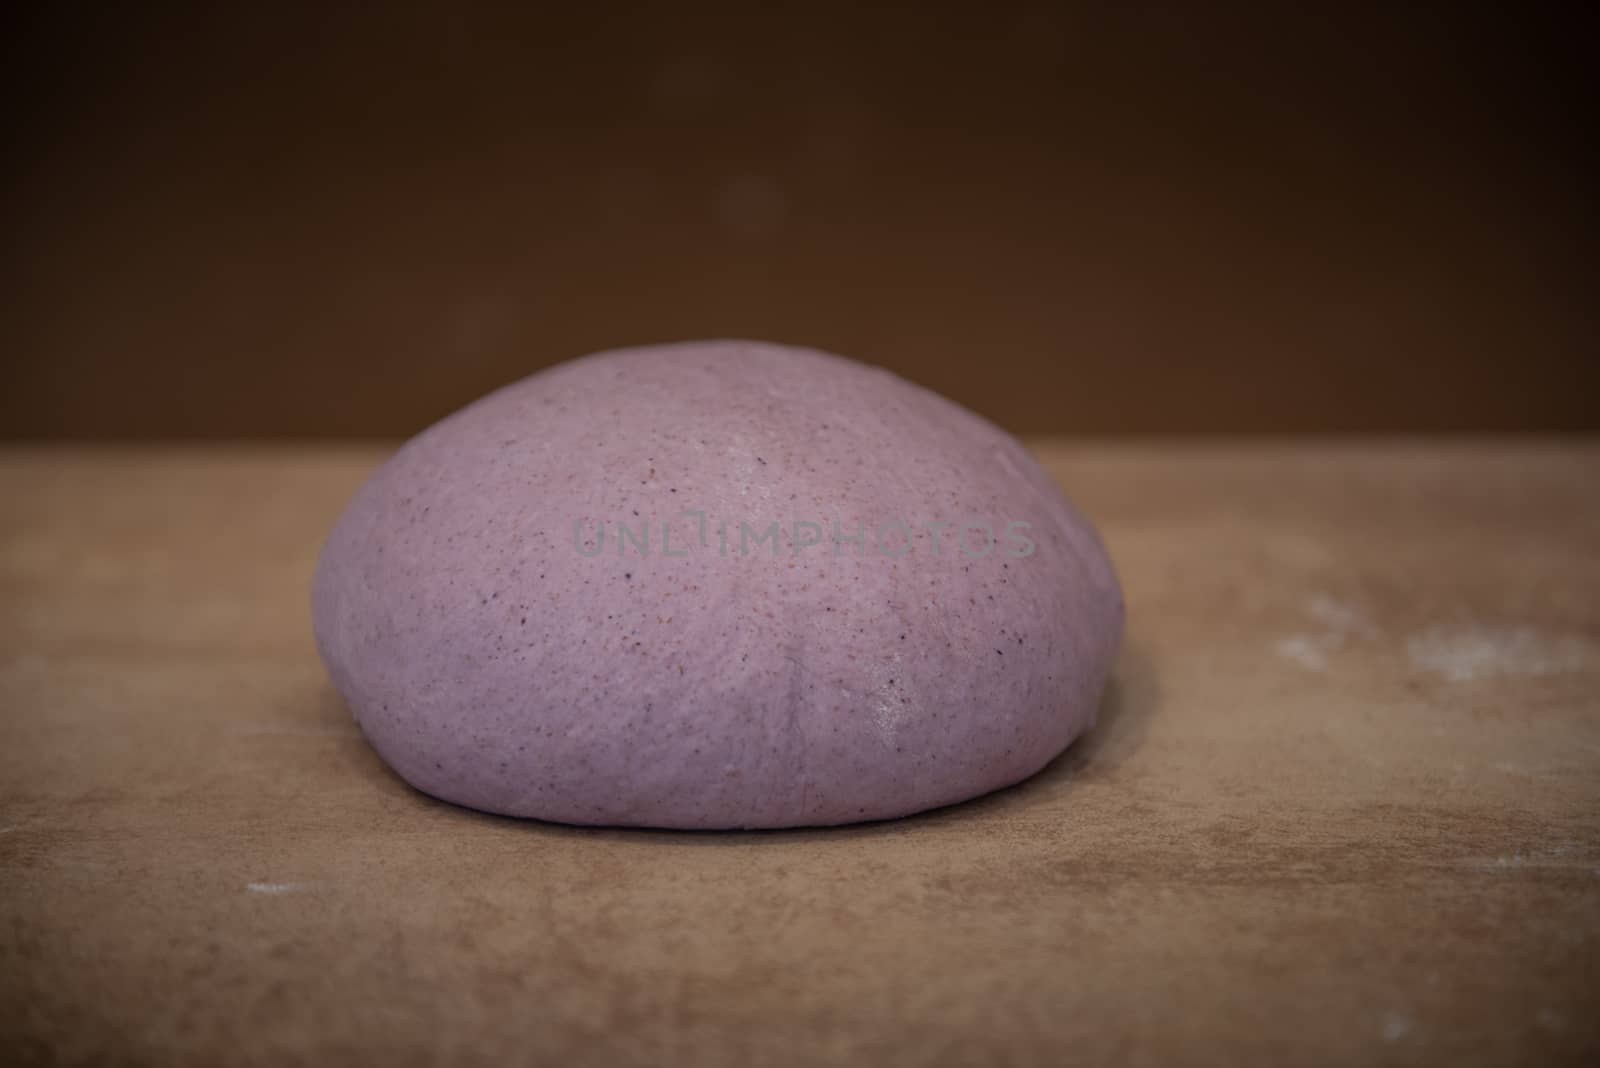 Preparation for bread unusual lilac-colored dough on a brown background